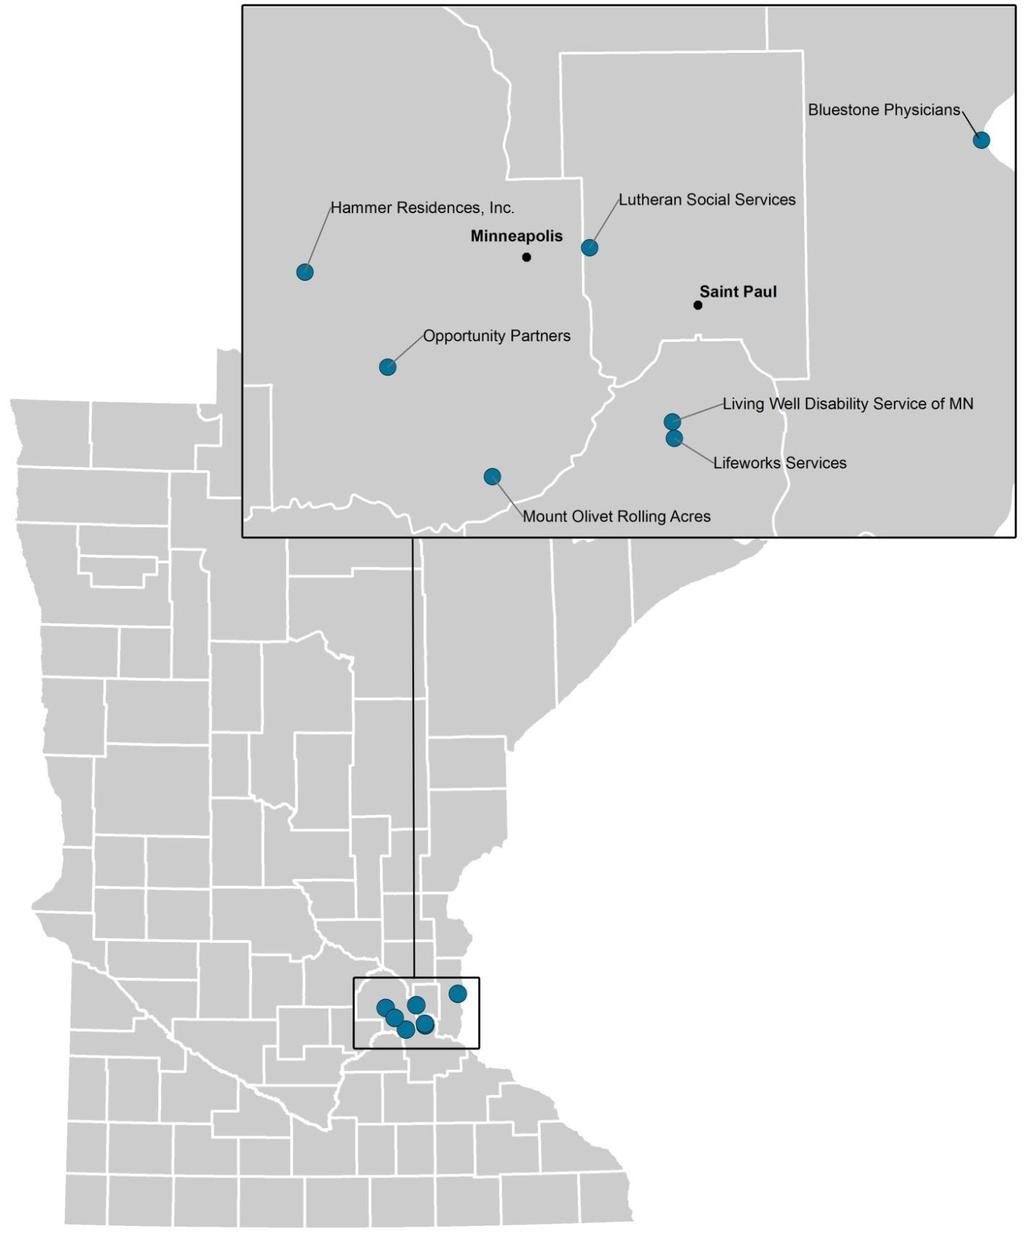 3. Lutheran Social Services of Minnesota (Altair ACO) Note: Plotted organizations may overlap because they are in close proximity.